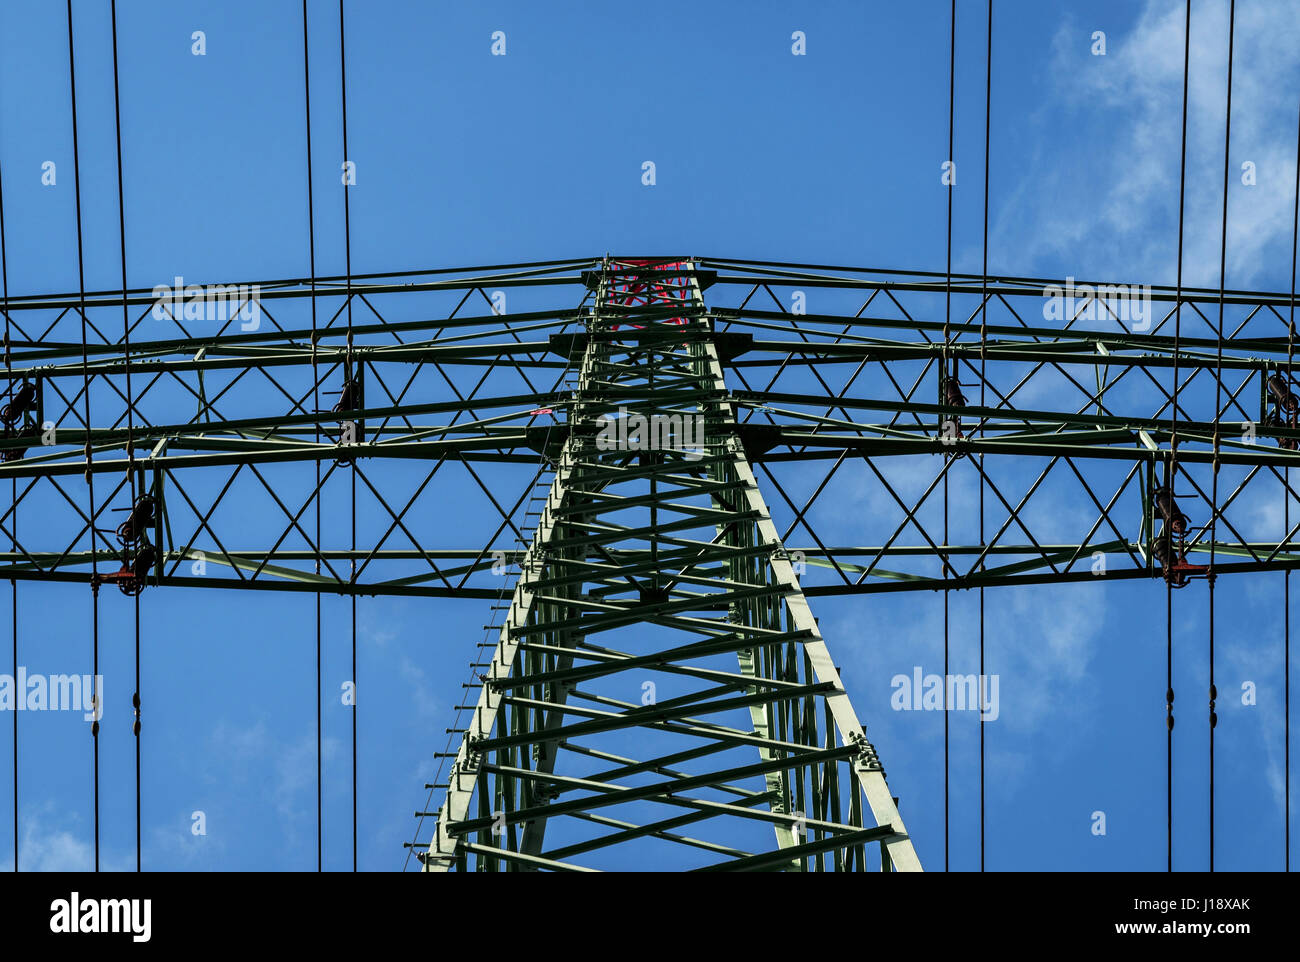 Overhead line mast or transmission tower from a slightly different view Stock Photo